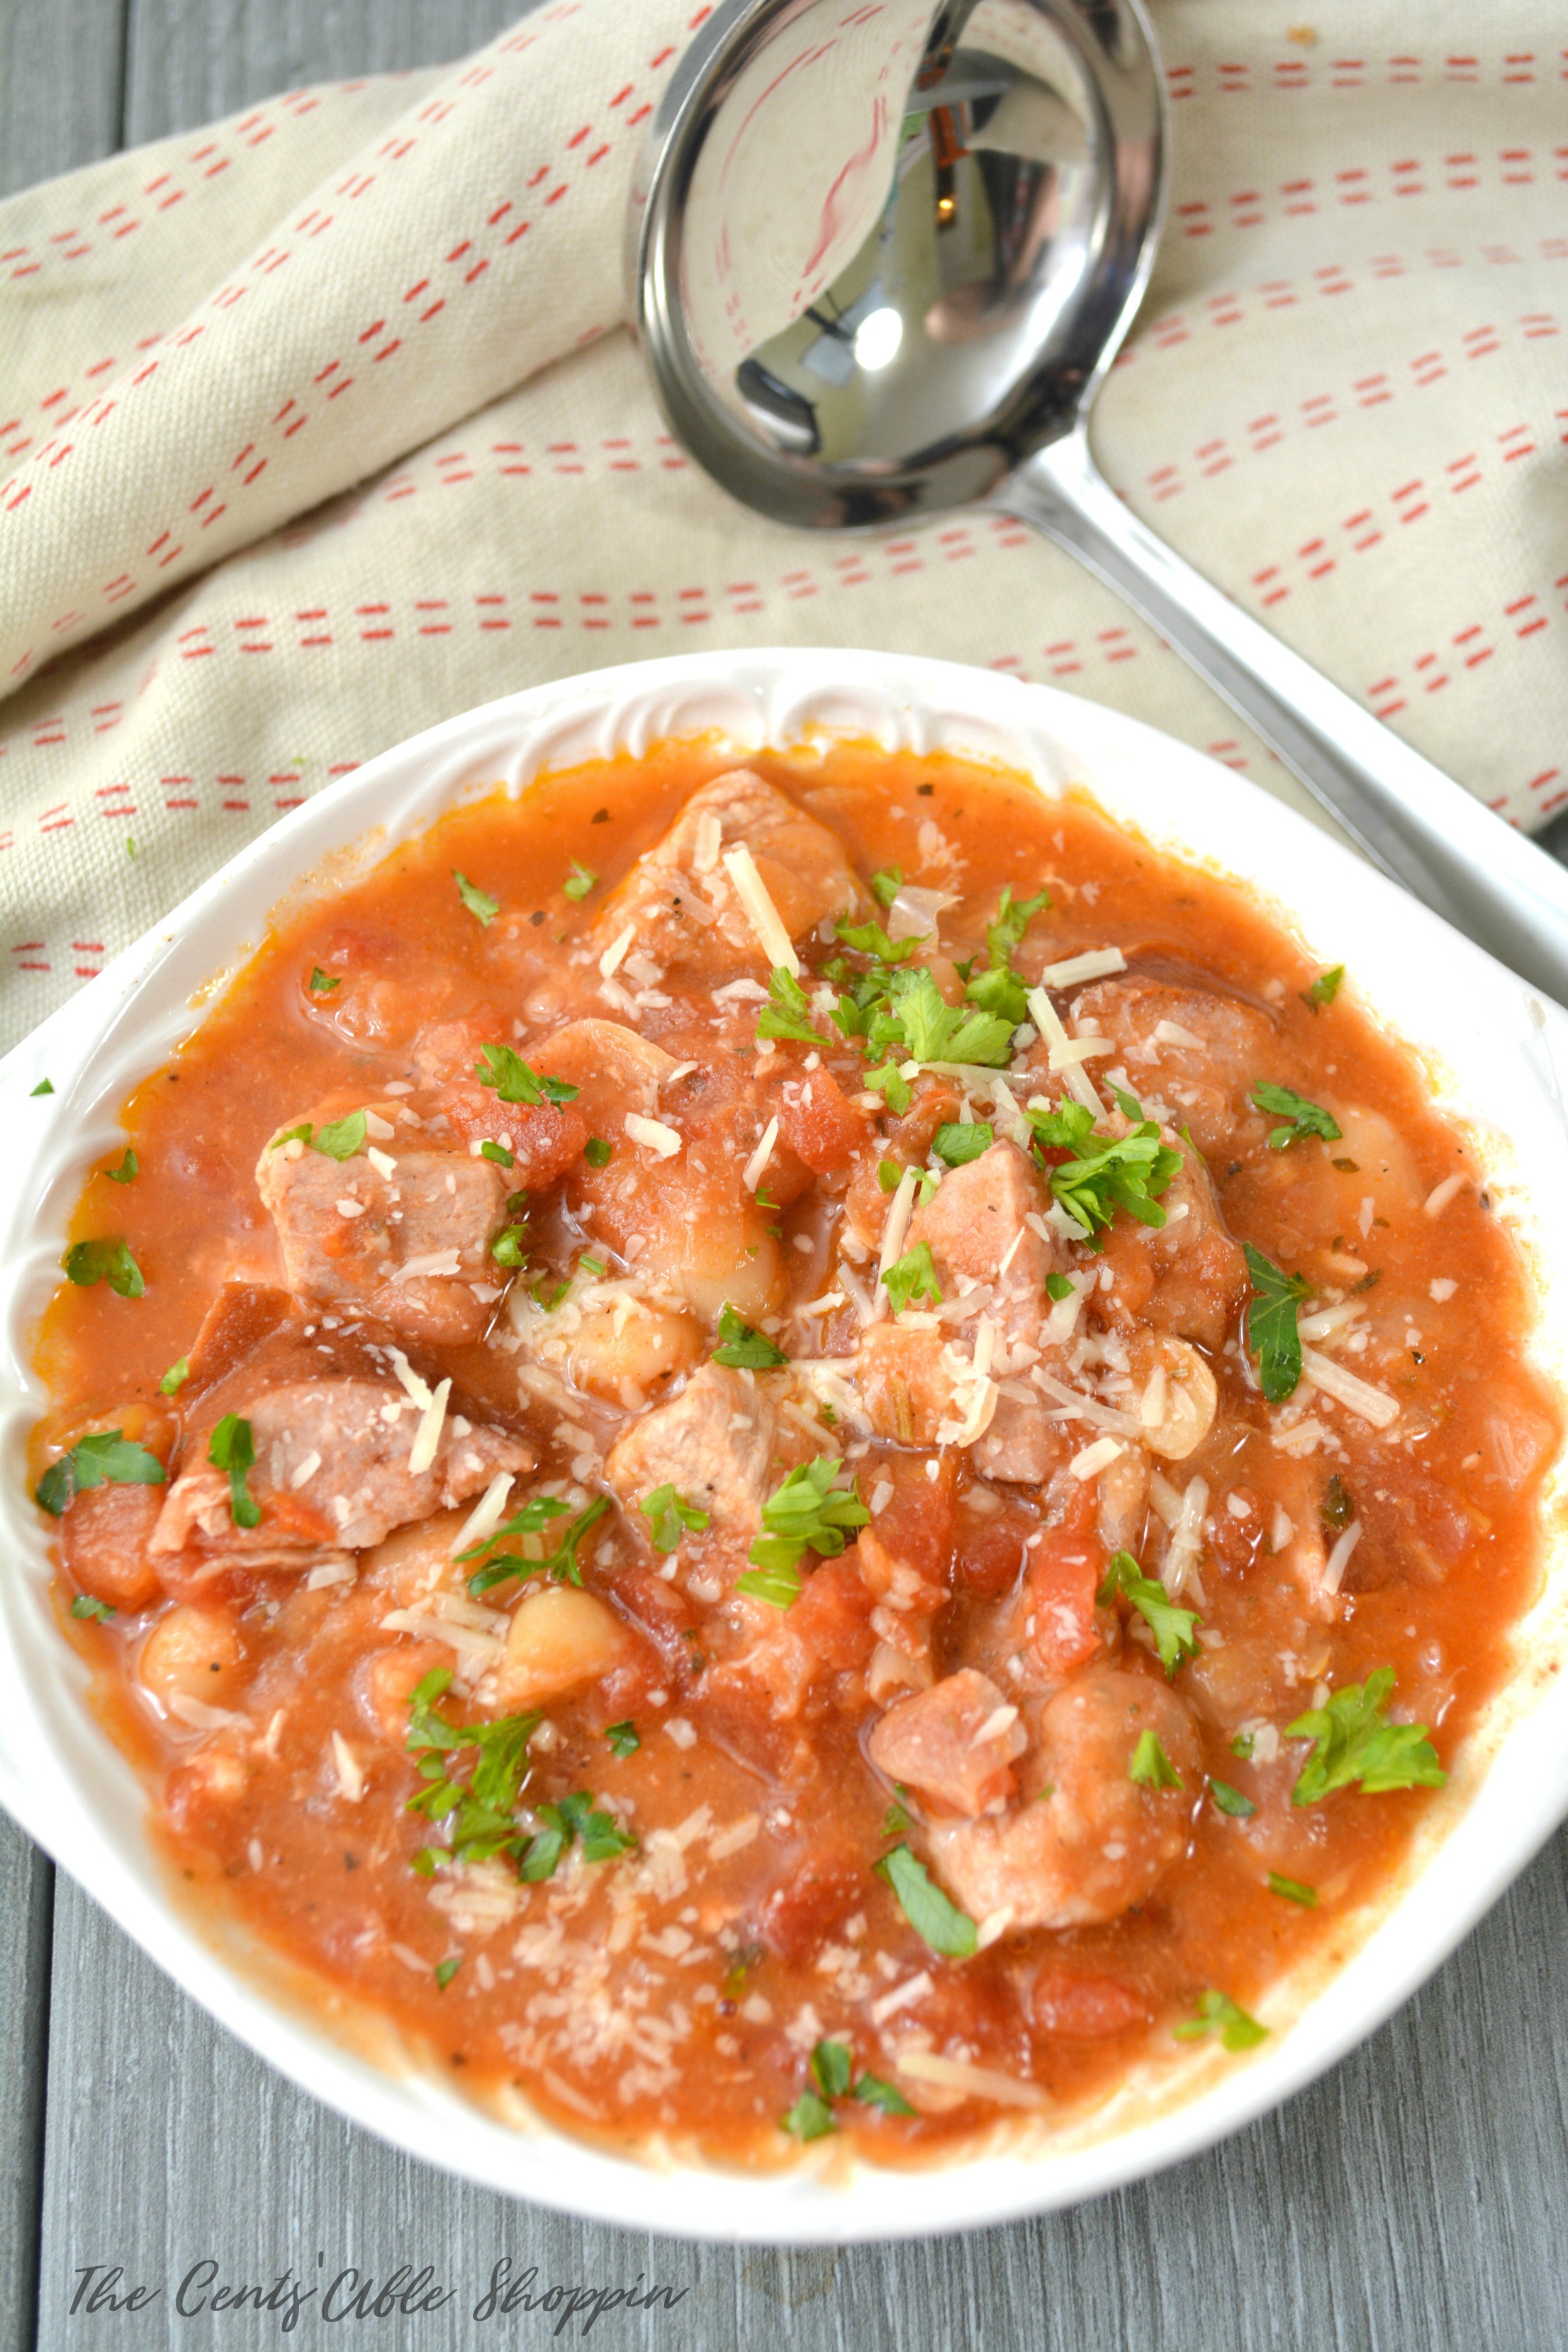 This easy yet hearty Pork, Smoked Sausage and Bean Instant Pot soup comes together quickly and easily for busy weeknights! 